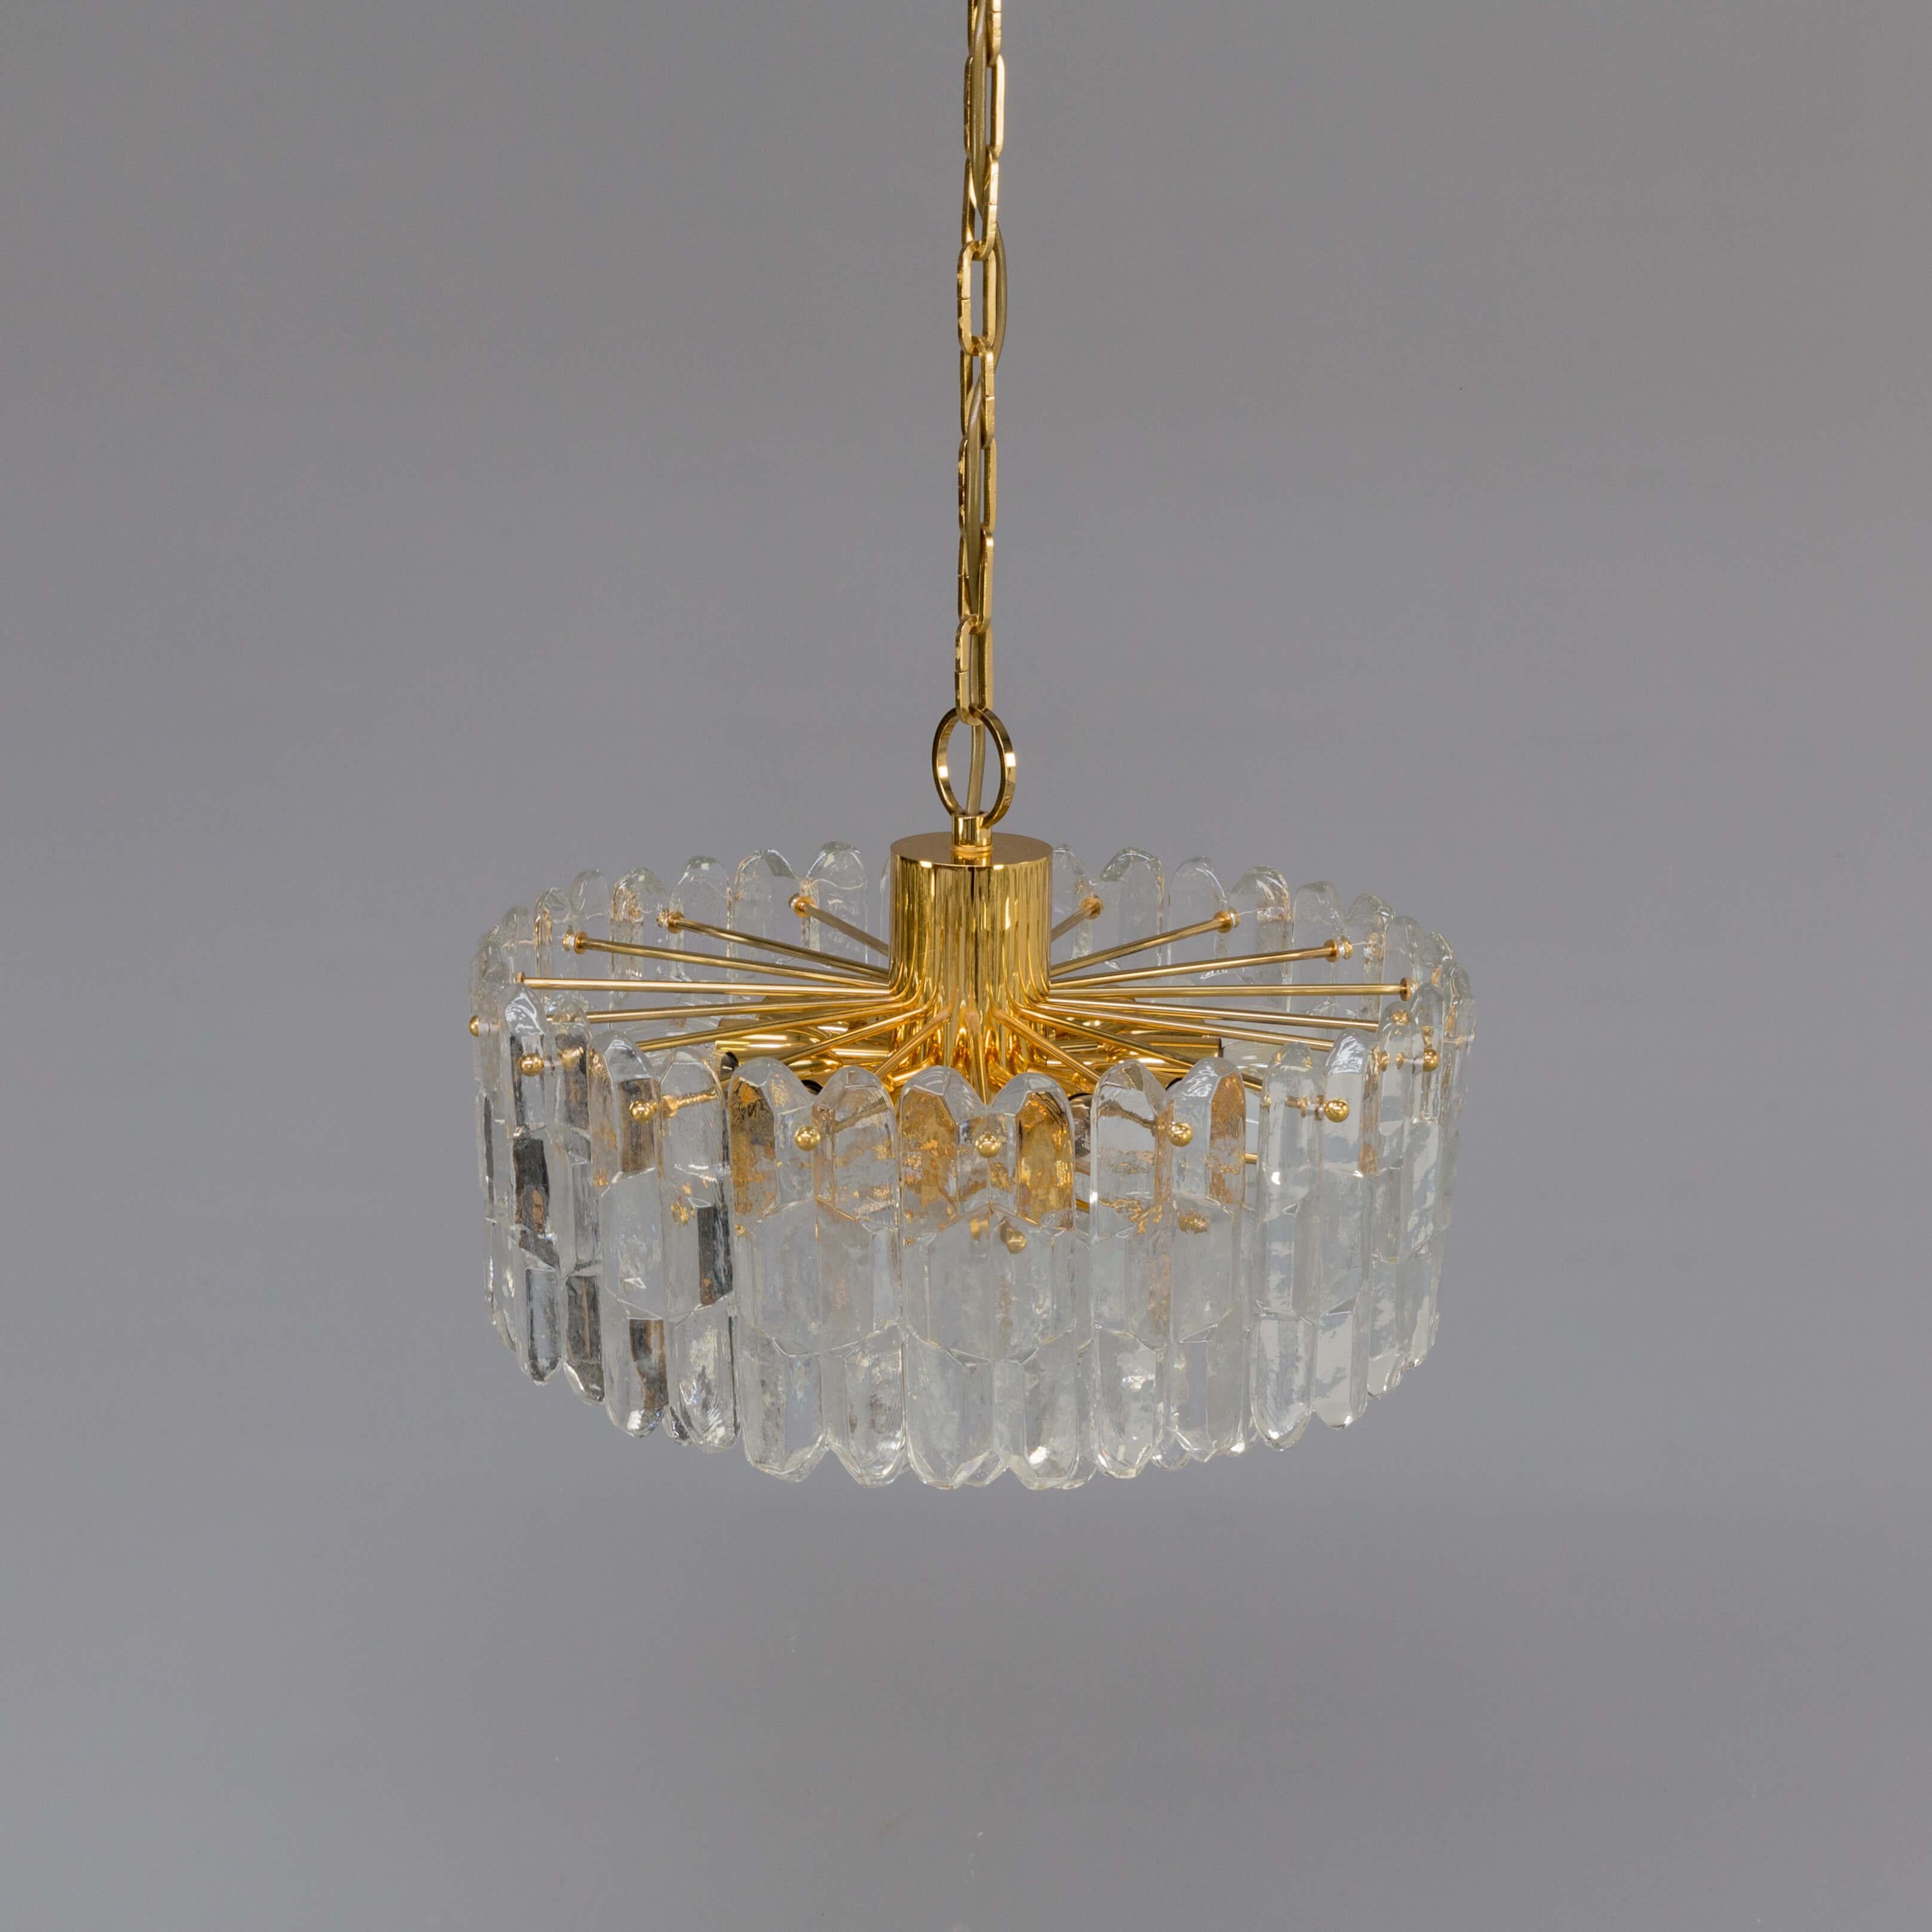 20th Century 1960s J.T. Kalmar Brass and Glass Pendant Hanging Lamp for Kalmar For Sale